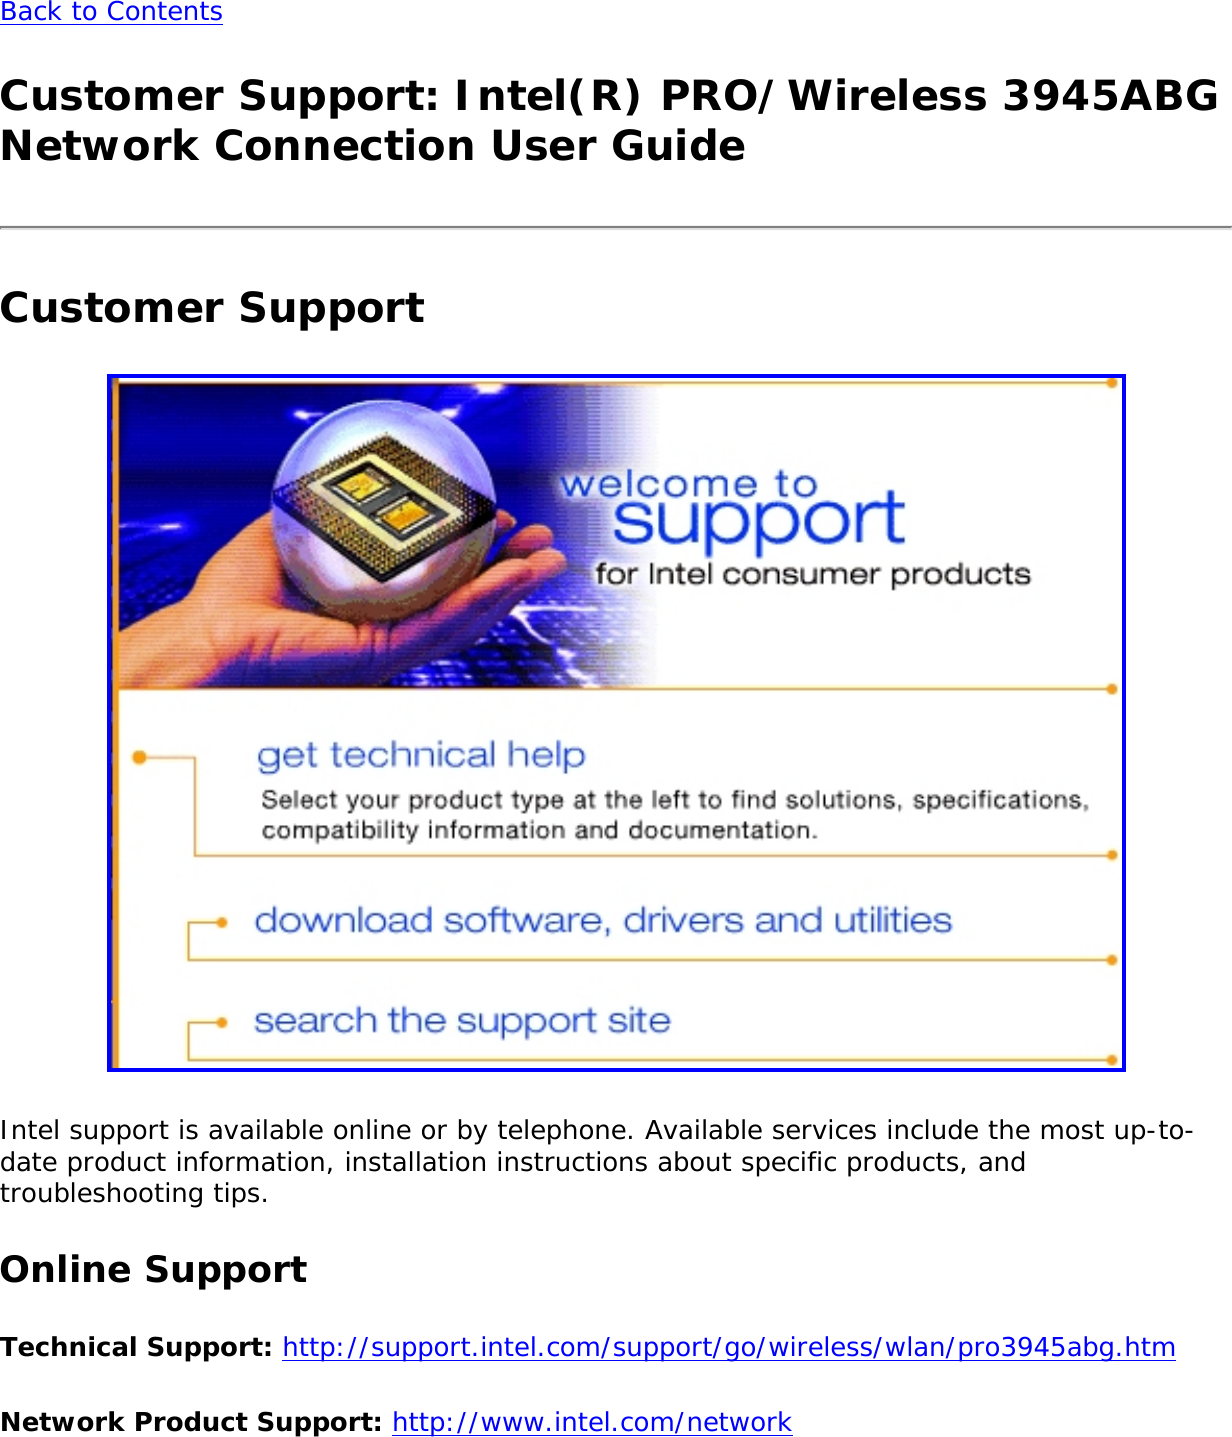 Back to ContentsCustomer Support: Intel(R) PRO/Wireless 3945ABG Network Connection User GuideCustomer Support Intel support is available online or by telephone. Available services include the most up-to-date product information, installation instructions about specific products, and troubleshooting tips. Online SupportTechnical Support: http://support.intel.com/support/go/wireless/wlan/pro3945abg.htm Network Product Support: http://www.intel.com/network 